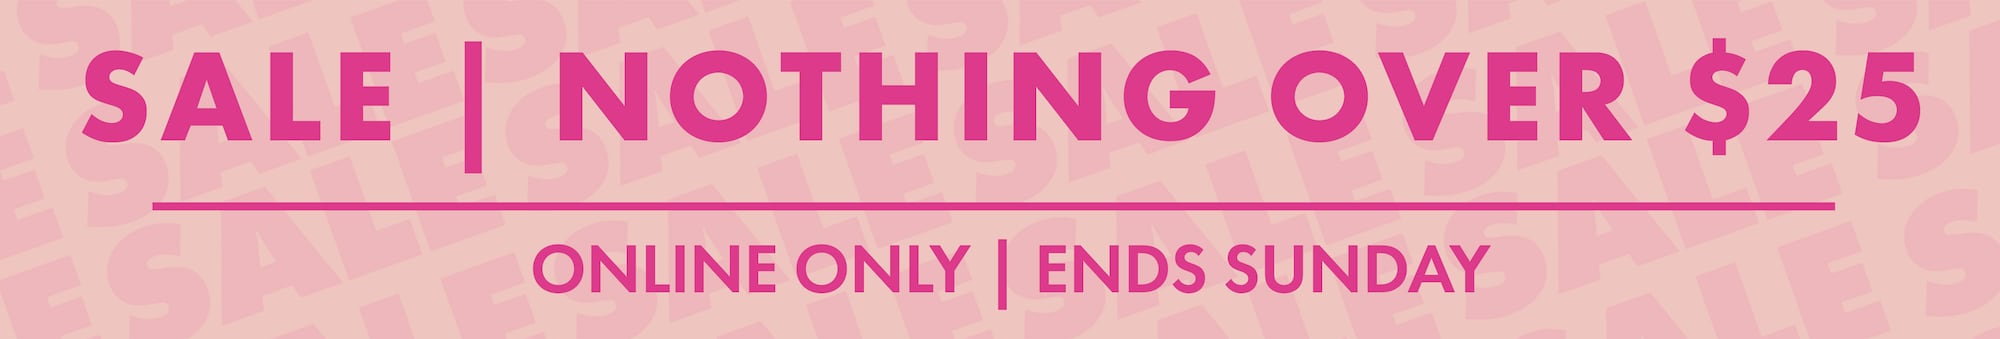 40% Off Everything